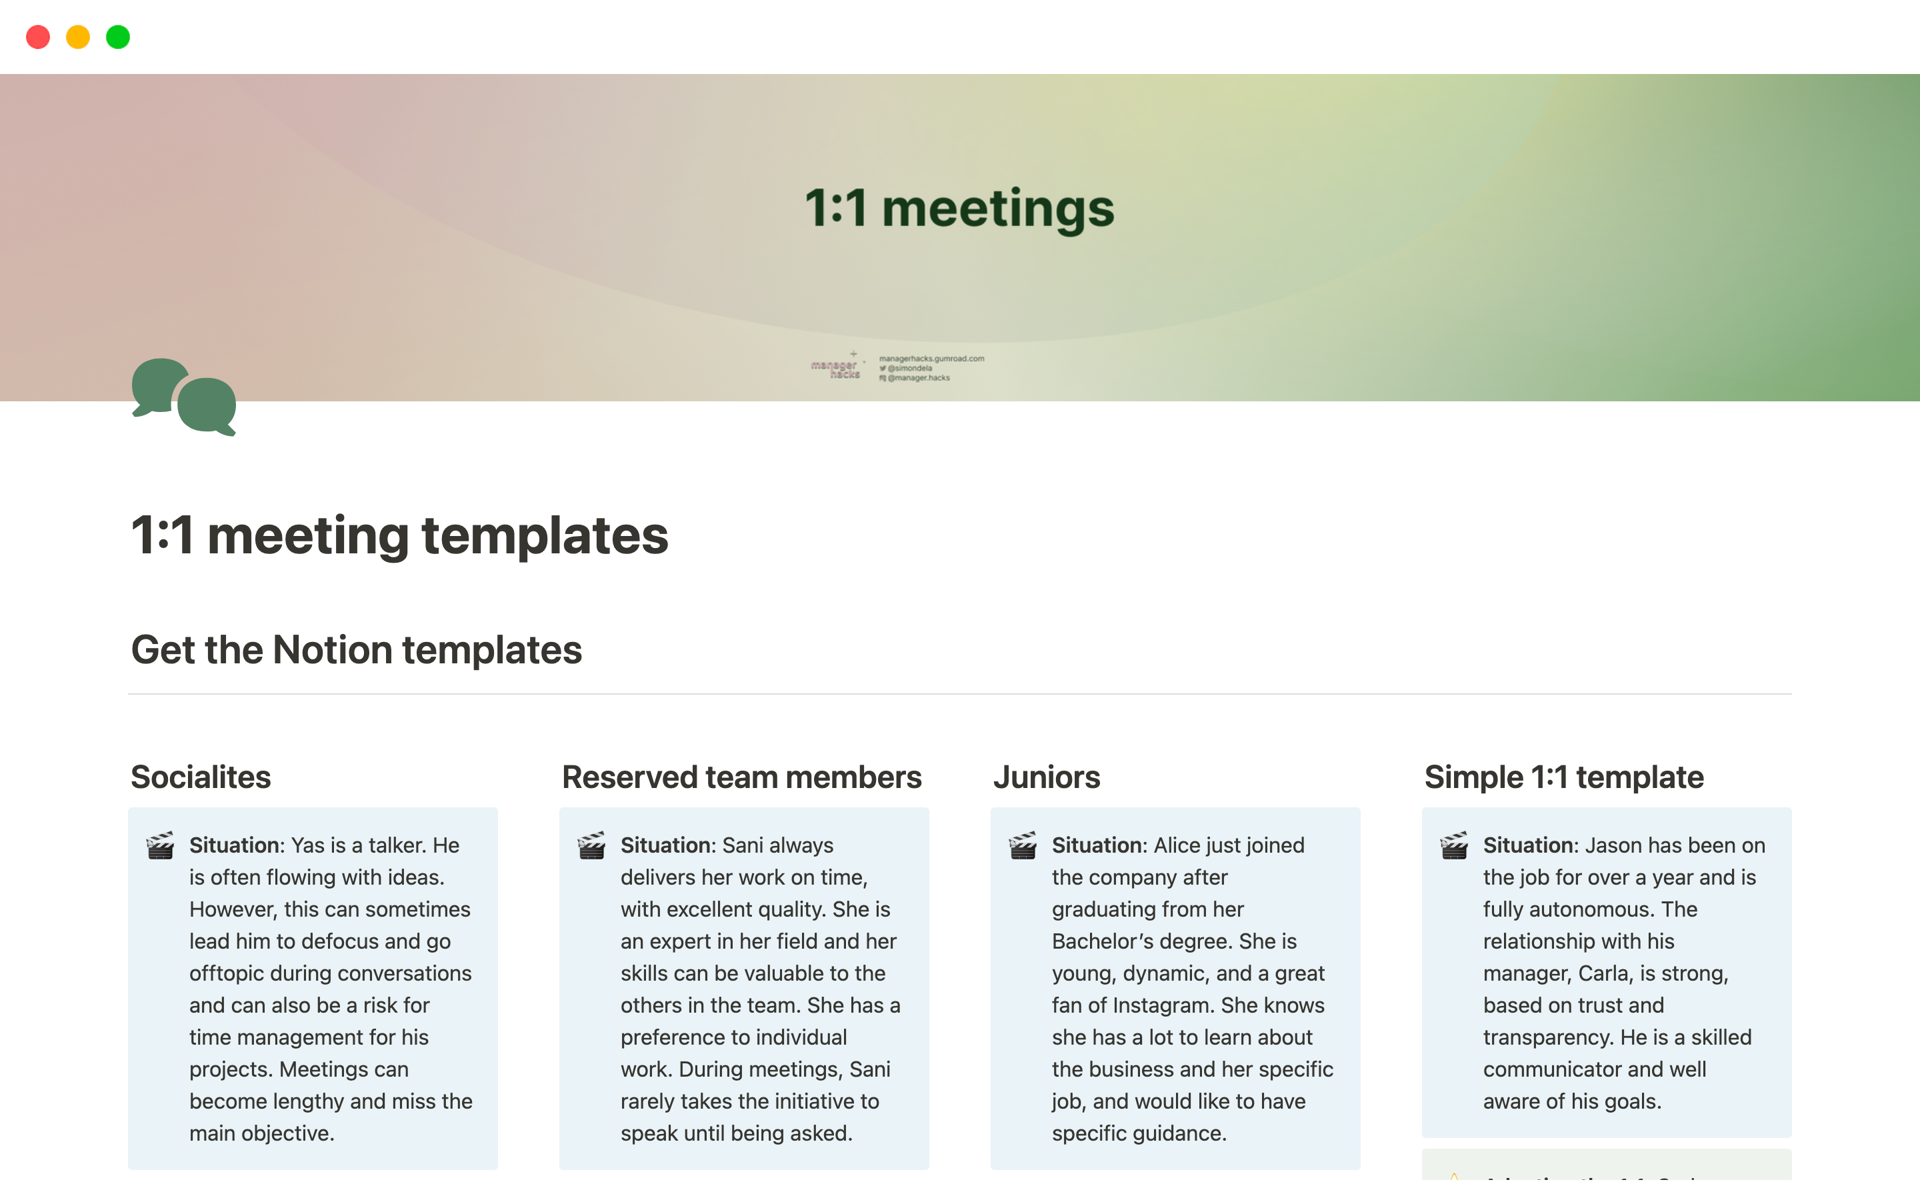 ➡️ 4 templates for 1:1s to fit every employee style and preference for insightful 1:1s with your team (Socialites, Reserved, Junior or Classic)